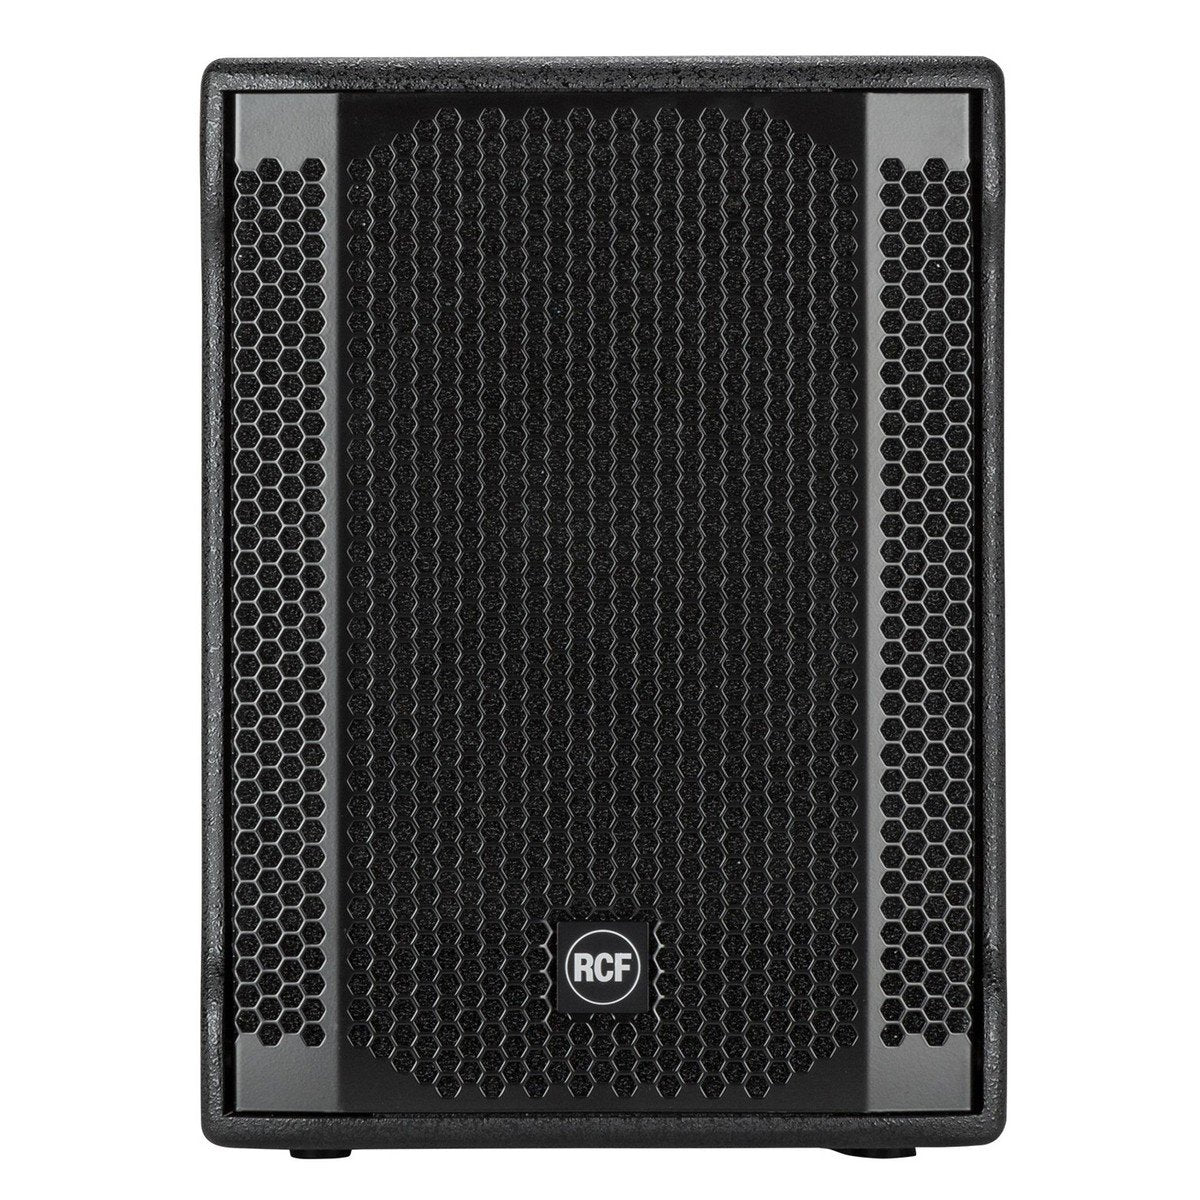 RCF SUB 702AS II 12" Subwoofer - DY Pro Audio